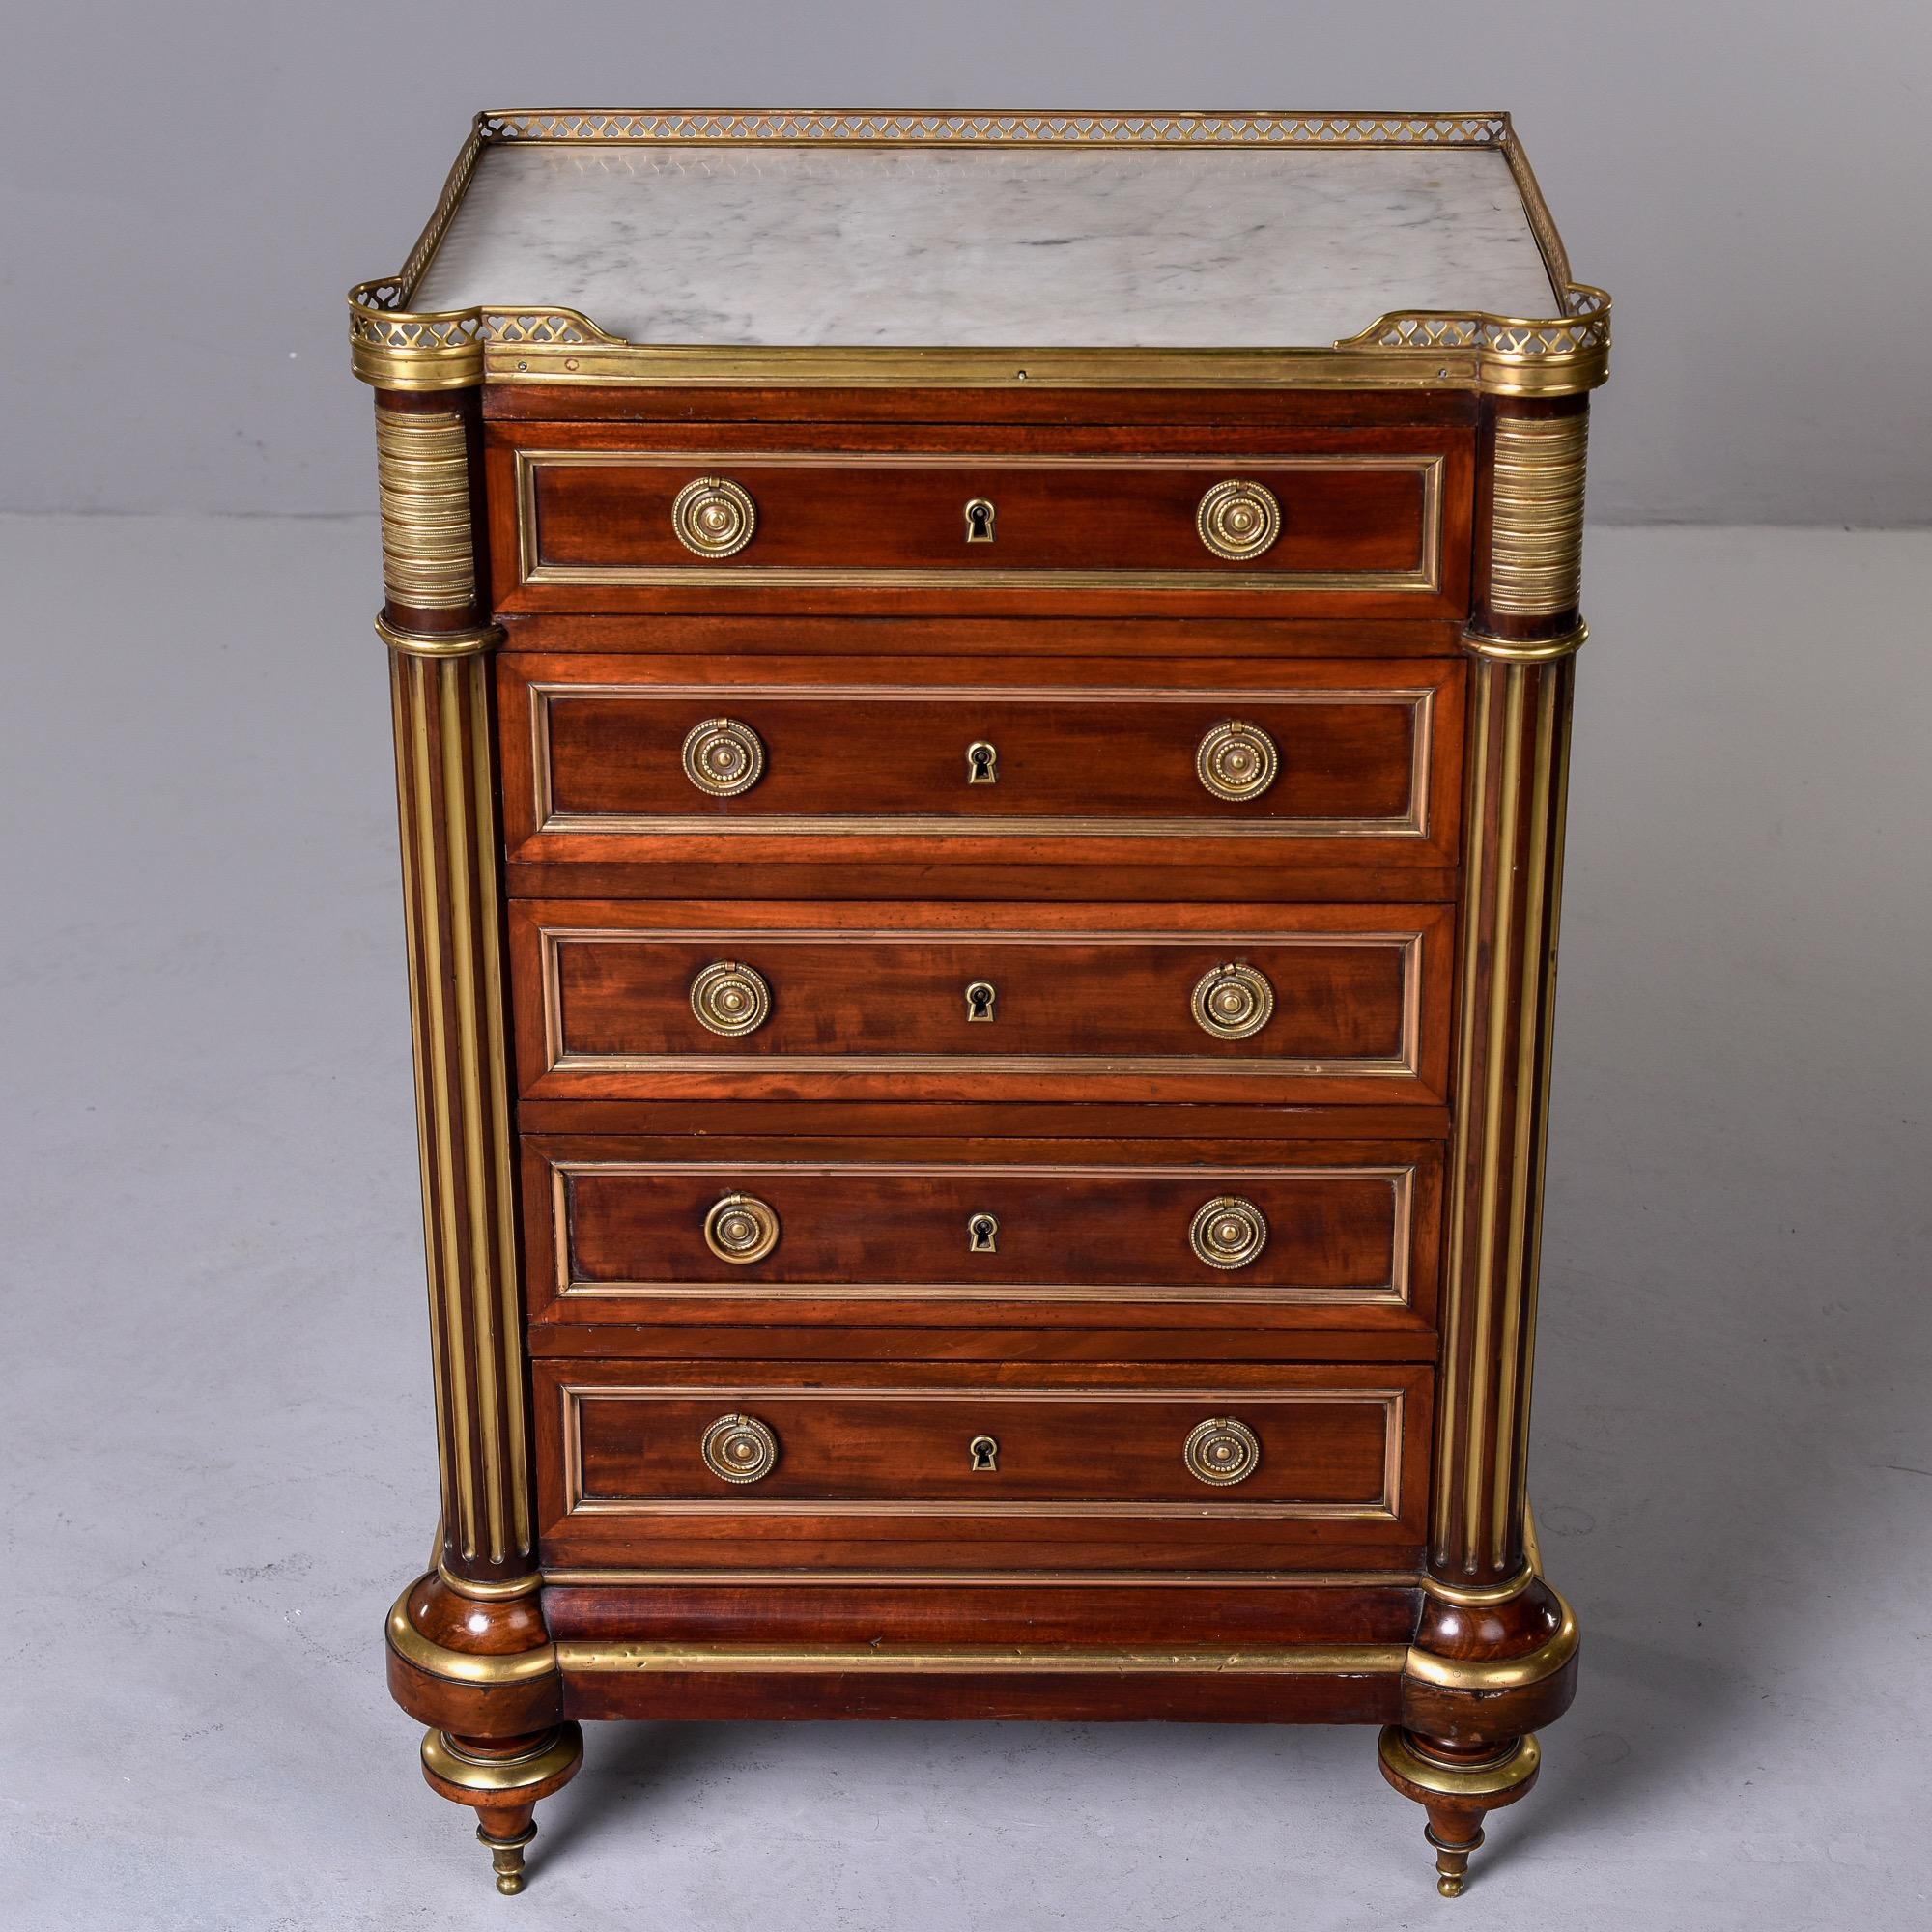 Circa 1900 five drawer Louis XVI style mahogany semanier features a white marble top, brass gallery, brass hardware and trim. Drawers have dovetail construction and escutcheons but no key was found or included with piece. Unknown maker. Very good